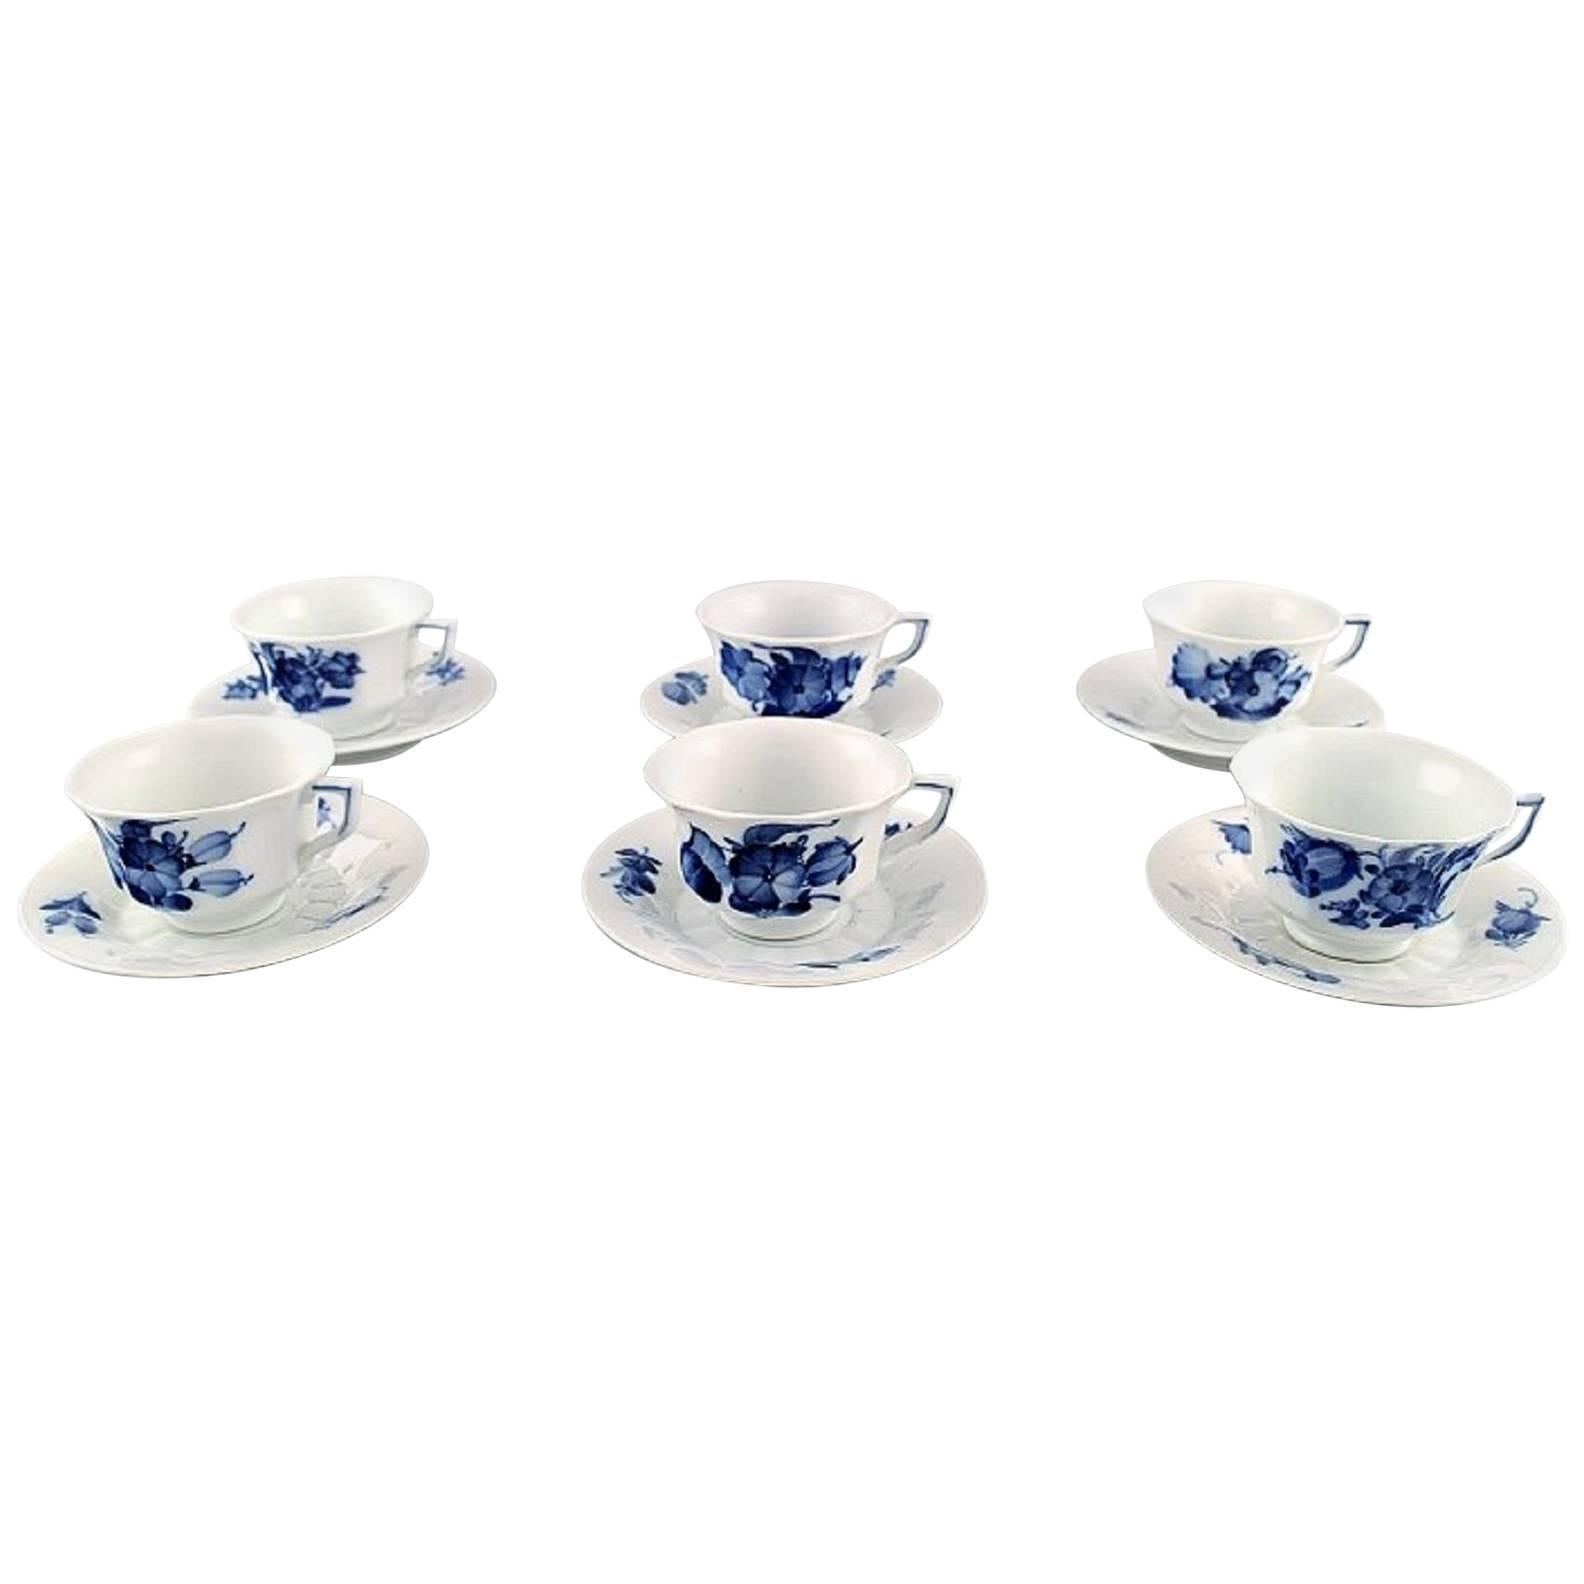 Six Persons Royal Copenhagen Blue Flower Angular, Six Coffee Cups with Saucers